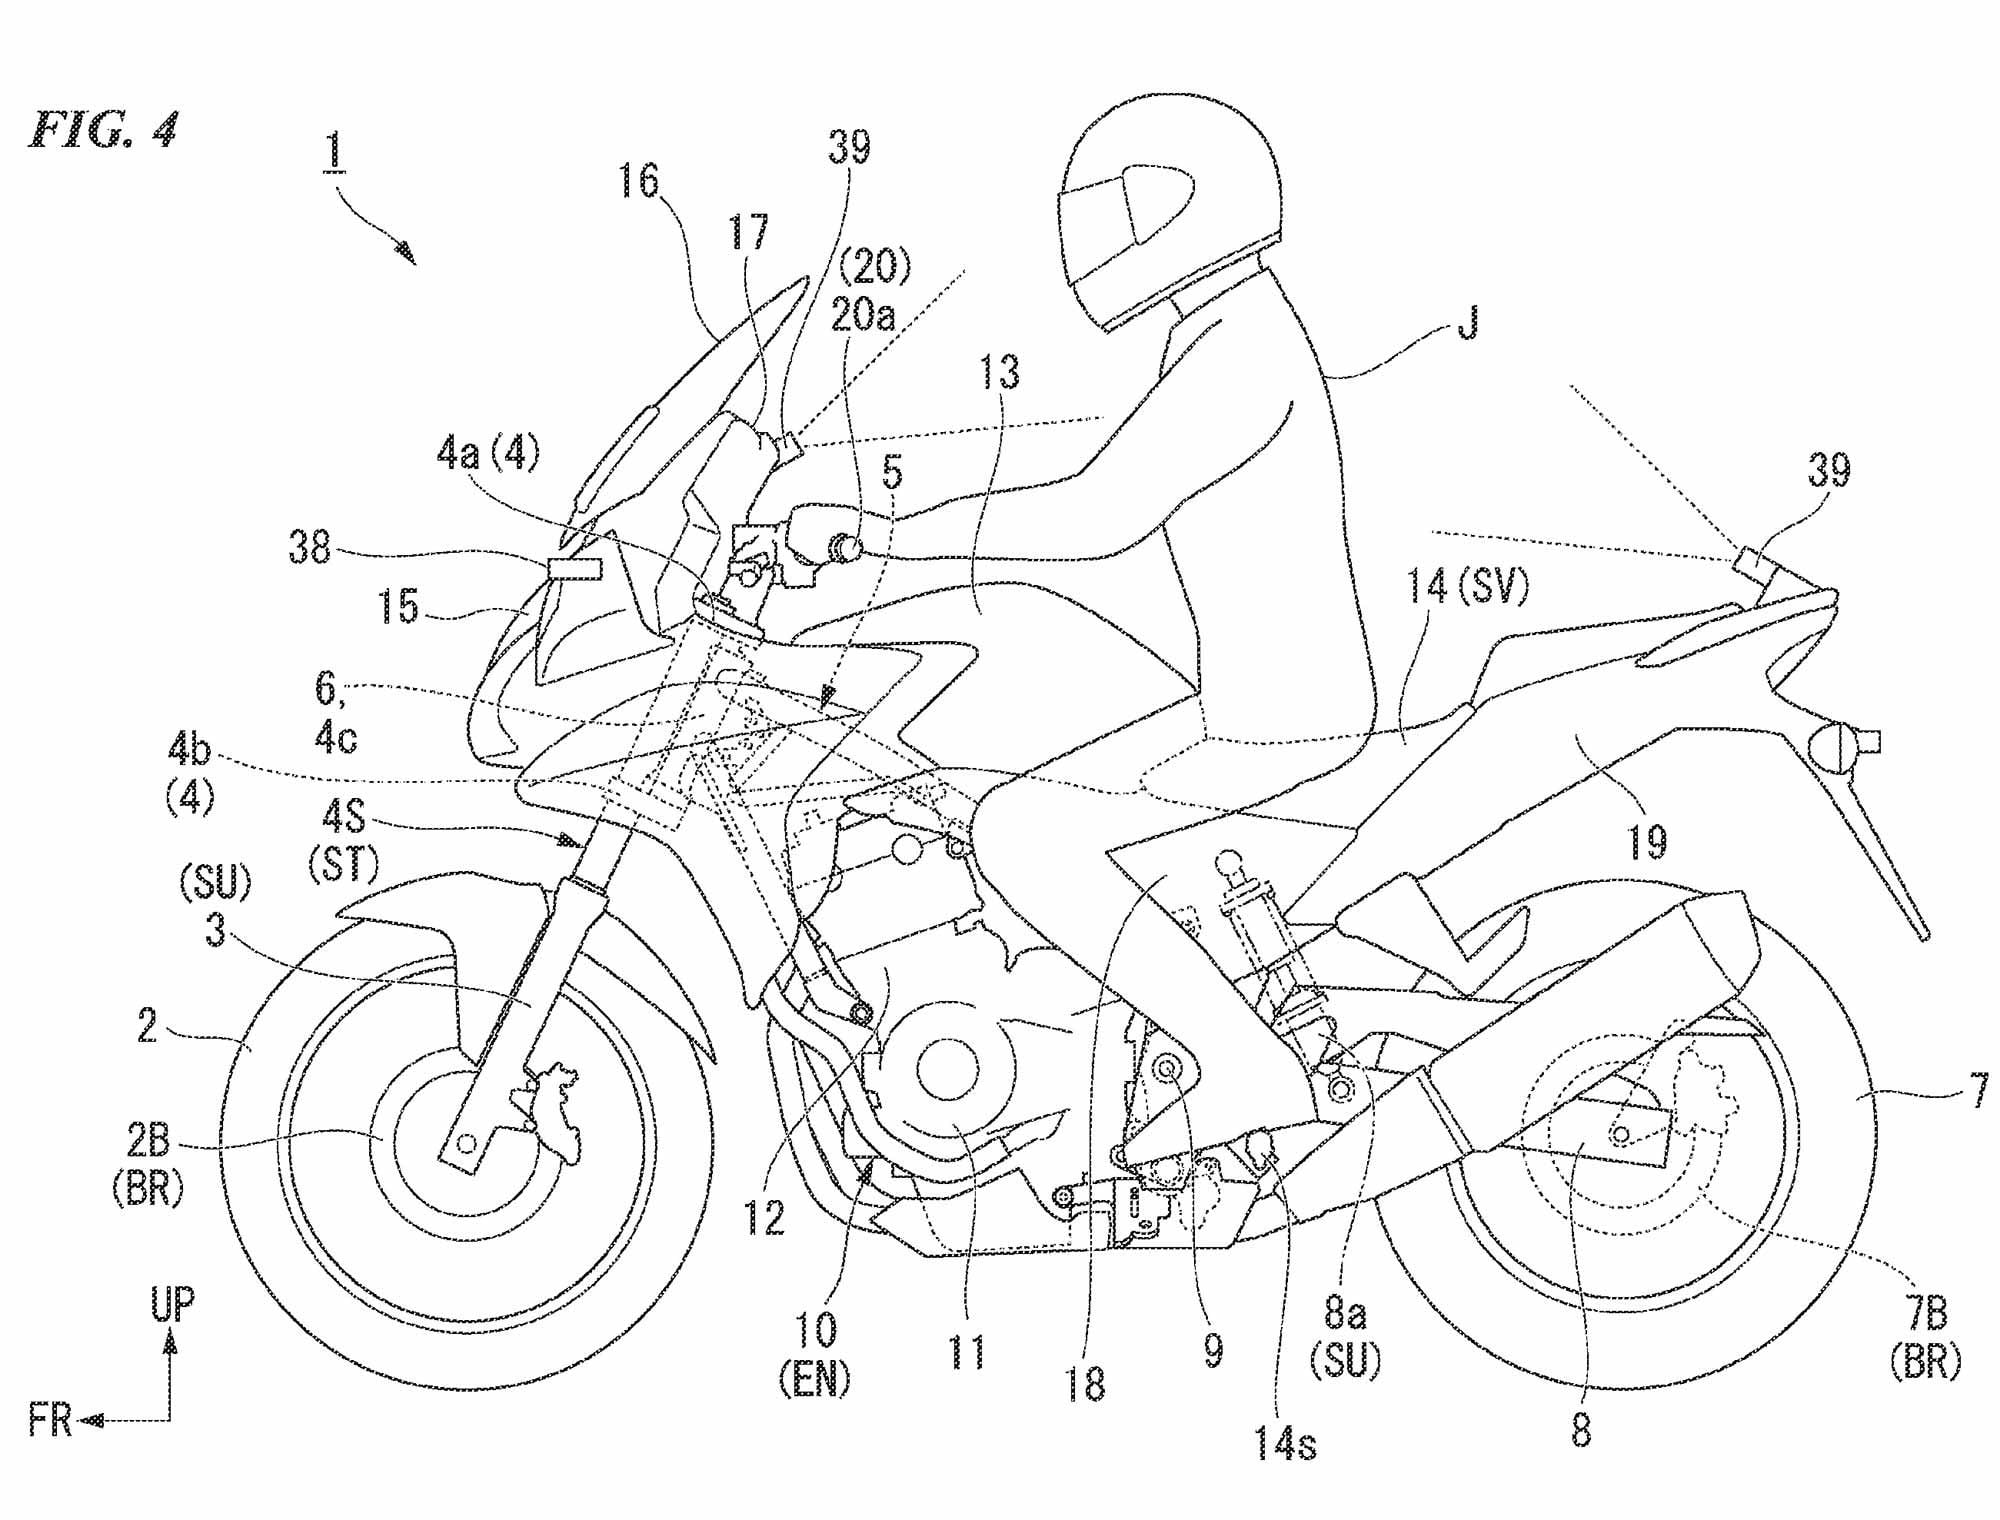 Honda continues to file patents for systems associated with its Rider Assist Technology suite.